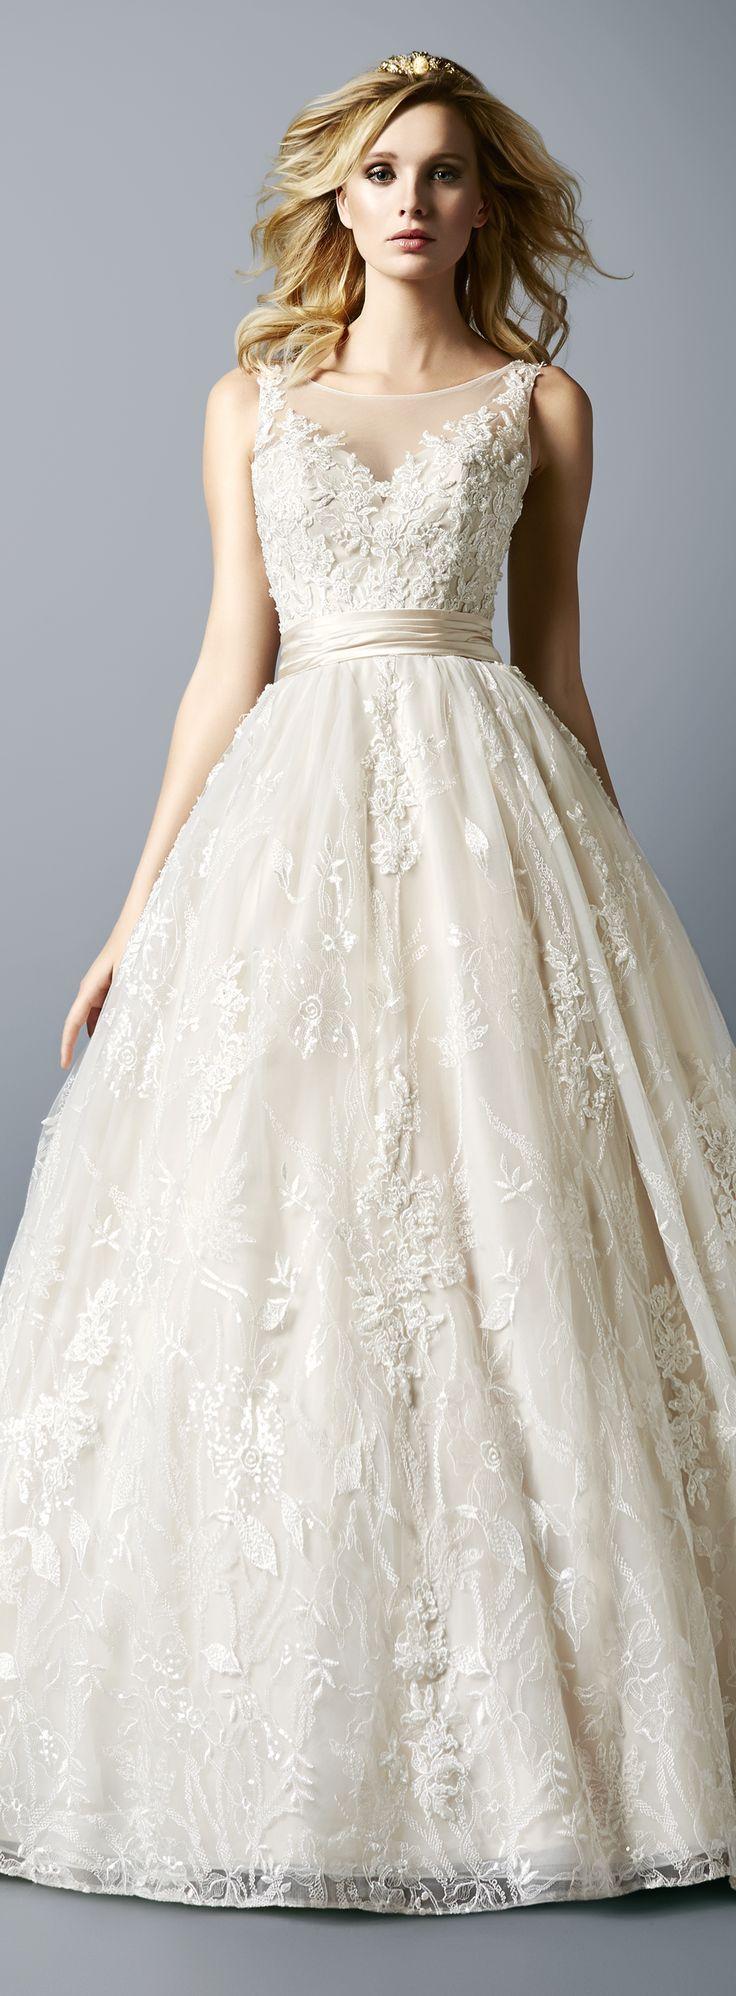 Wedding - BEADED AND LACE FULL BALL GOWN WITH ILLUSION NECKLINE 